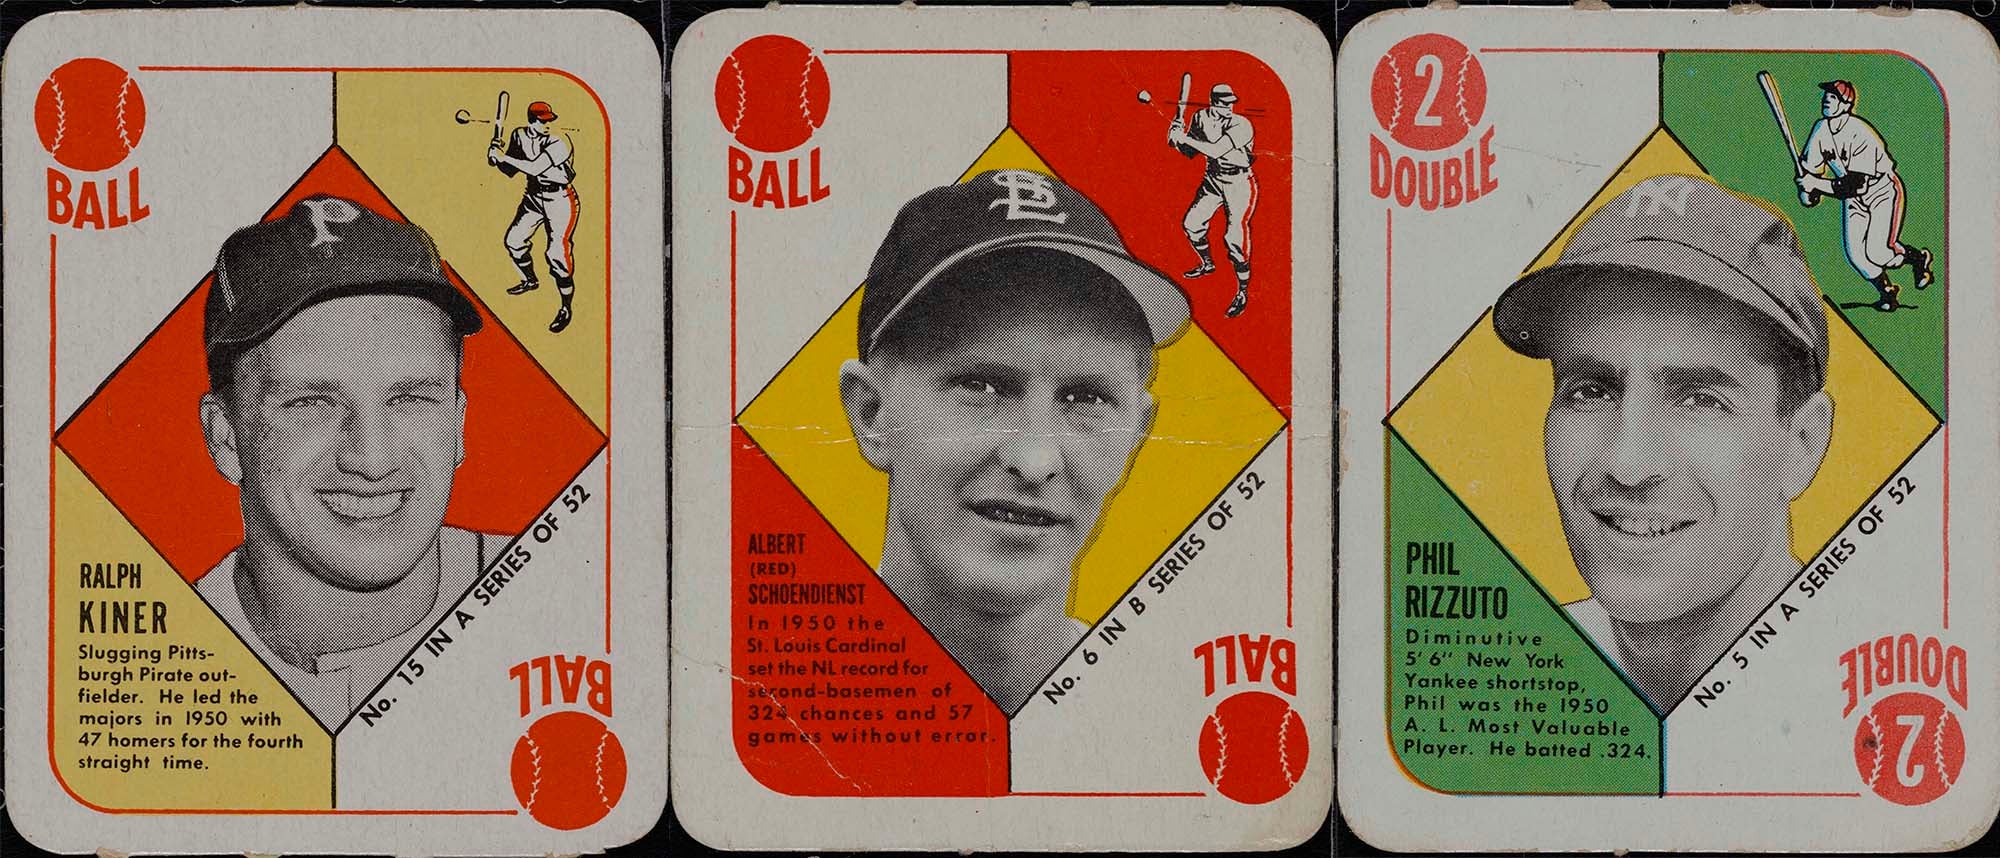 Topps entered baseball card market with first set in 1951